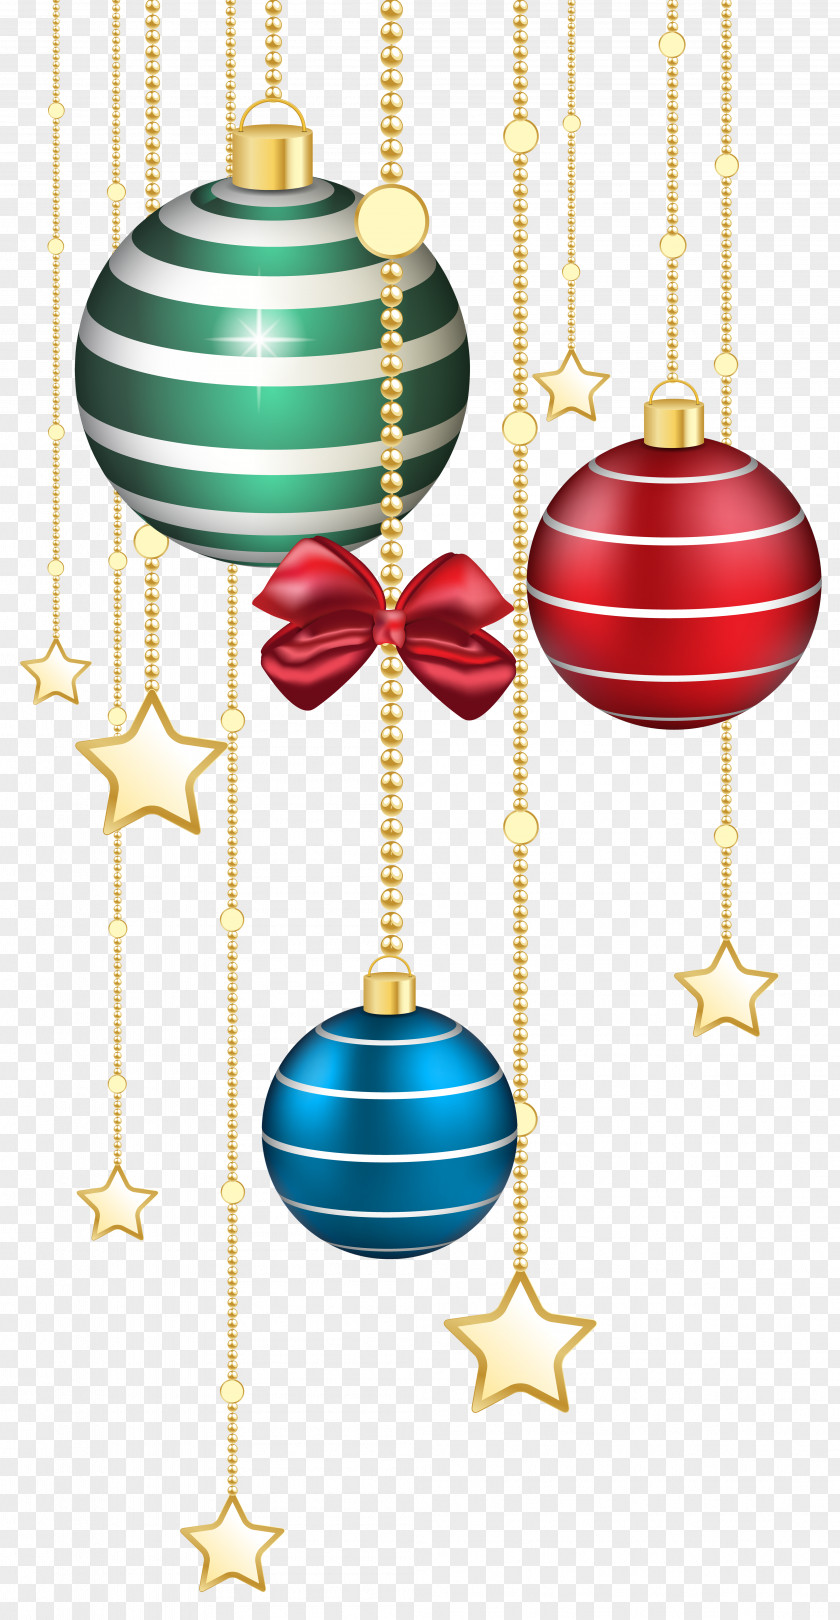 Ball Decoration Christmas Ornament Tree Clip Art PNG